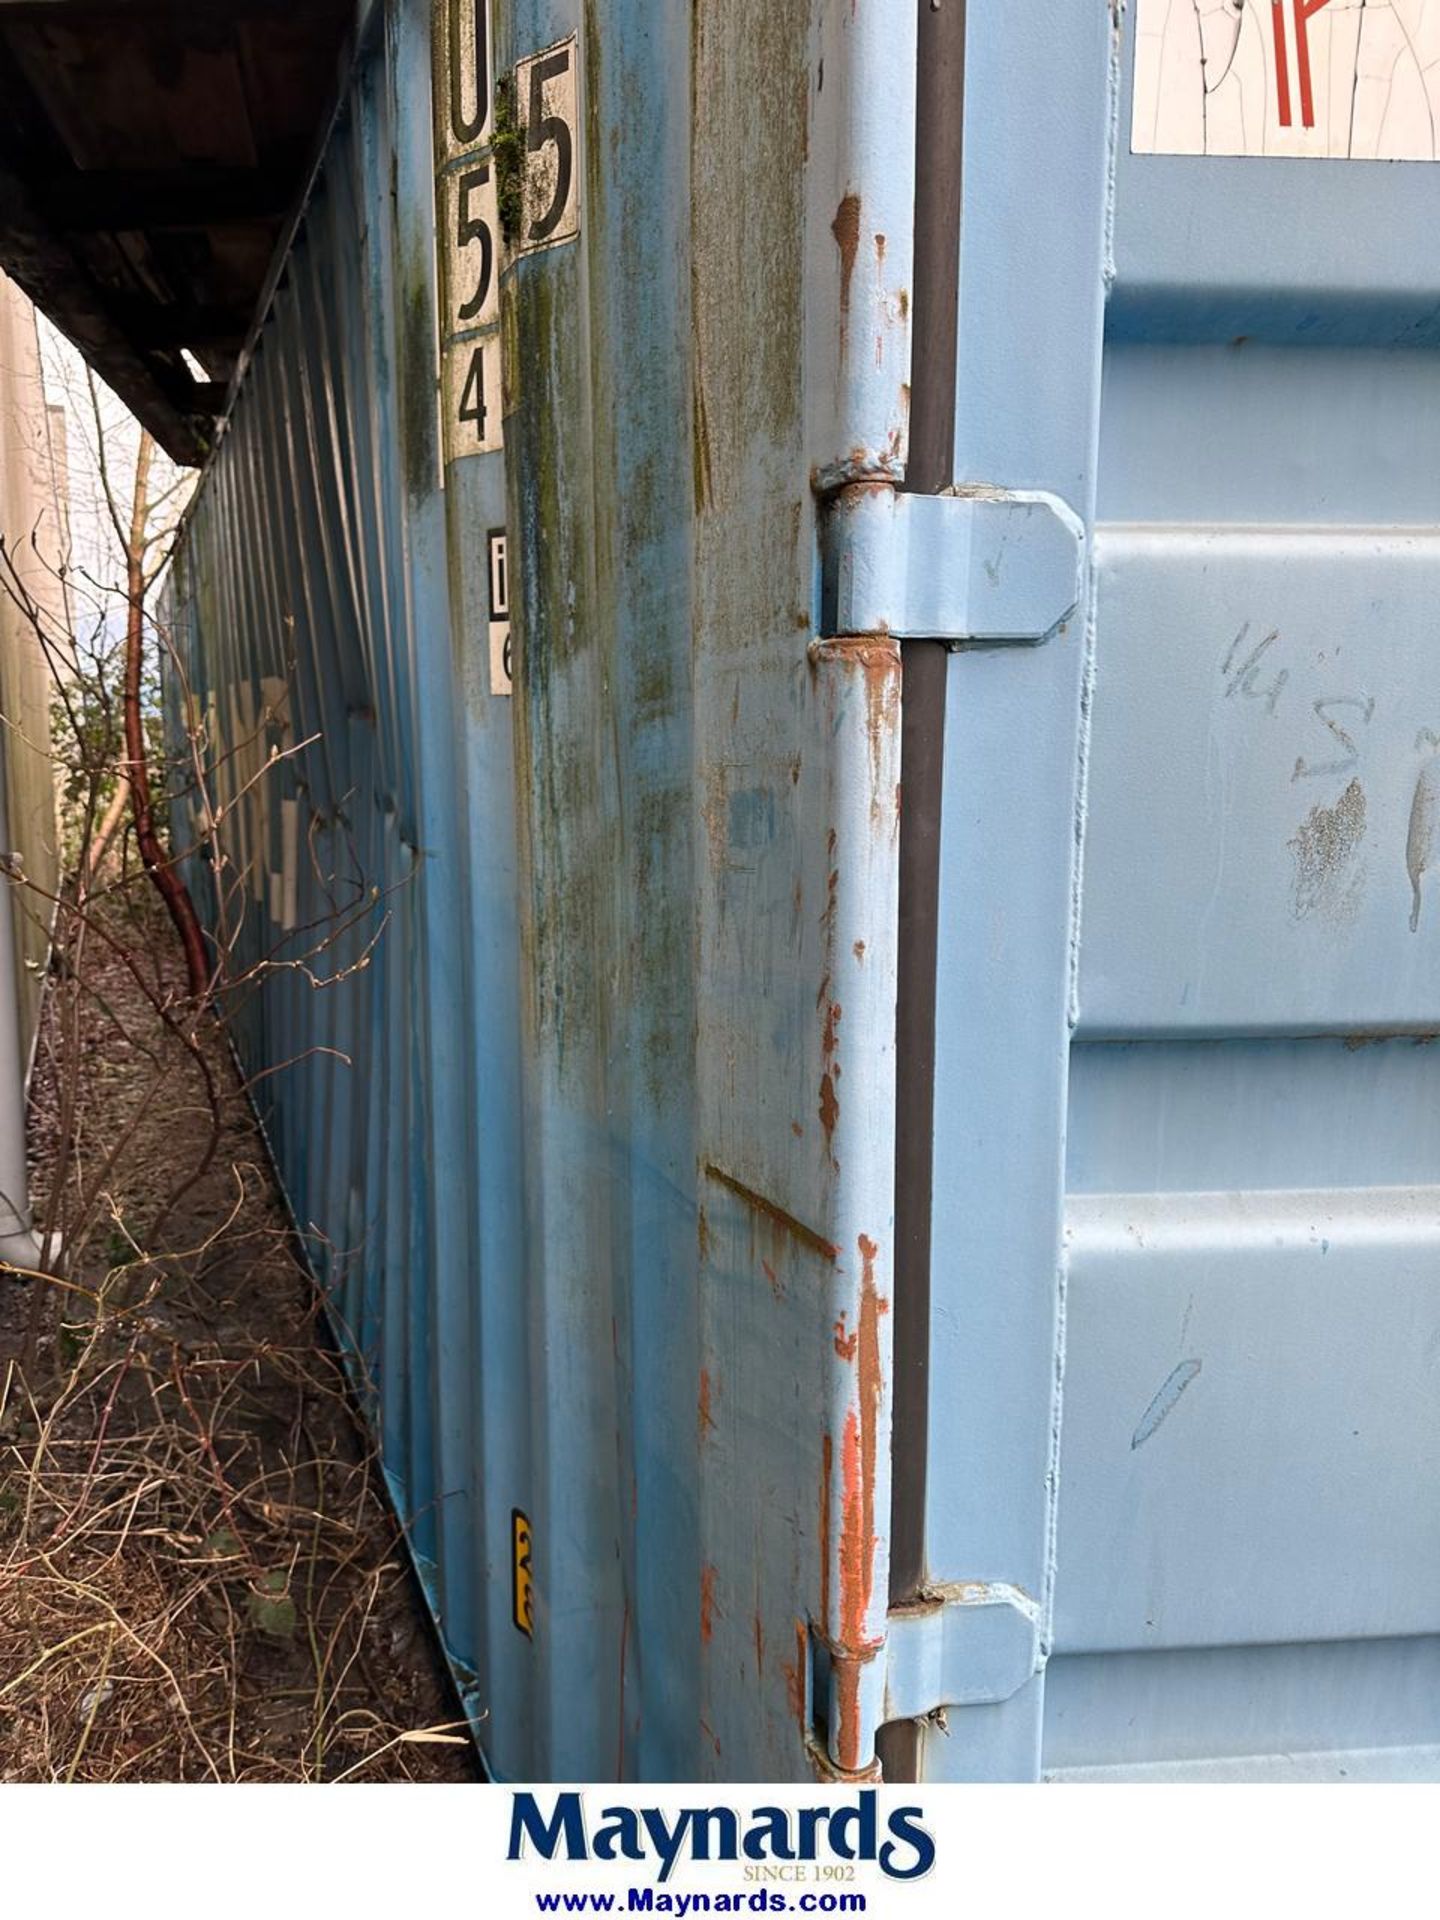 1996 40 ft shipping container (dented side) - Image 4 of 4